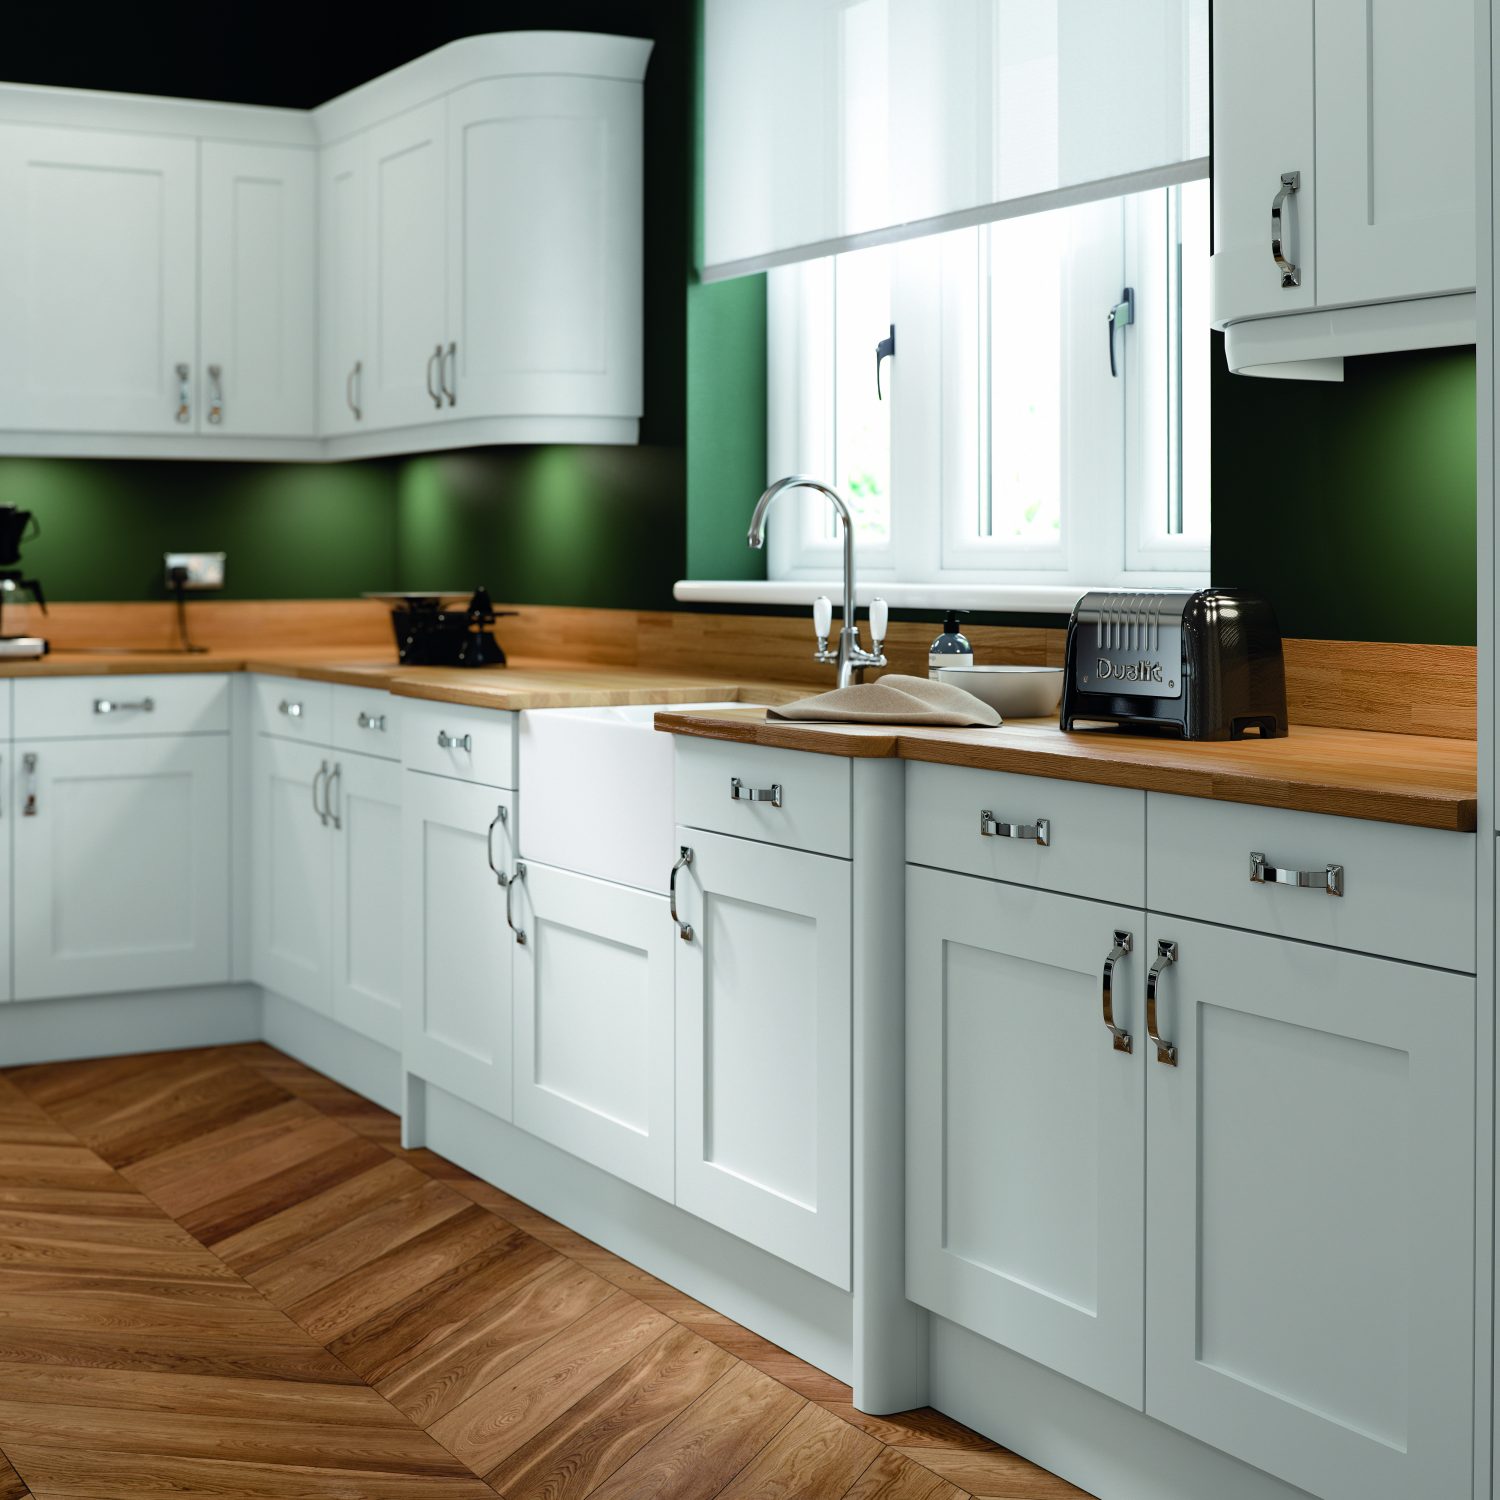 A beautifully traditional style with a modern twist, this kitchen design include Olympia white shaker doors and kitchen units. The walls are green and the floor is a lighter herringbone wood. The worktops are wooden with a toaster on display to the right of the sink. The sink is a white Belfast style sink, with chrome tap. The kitchen handles are chrome. The kitchen window is placed behind the sink and is letting light in with the white blinds half opened.